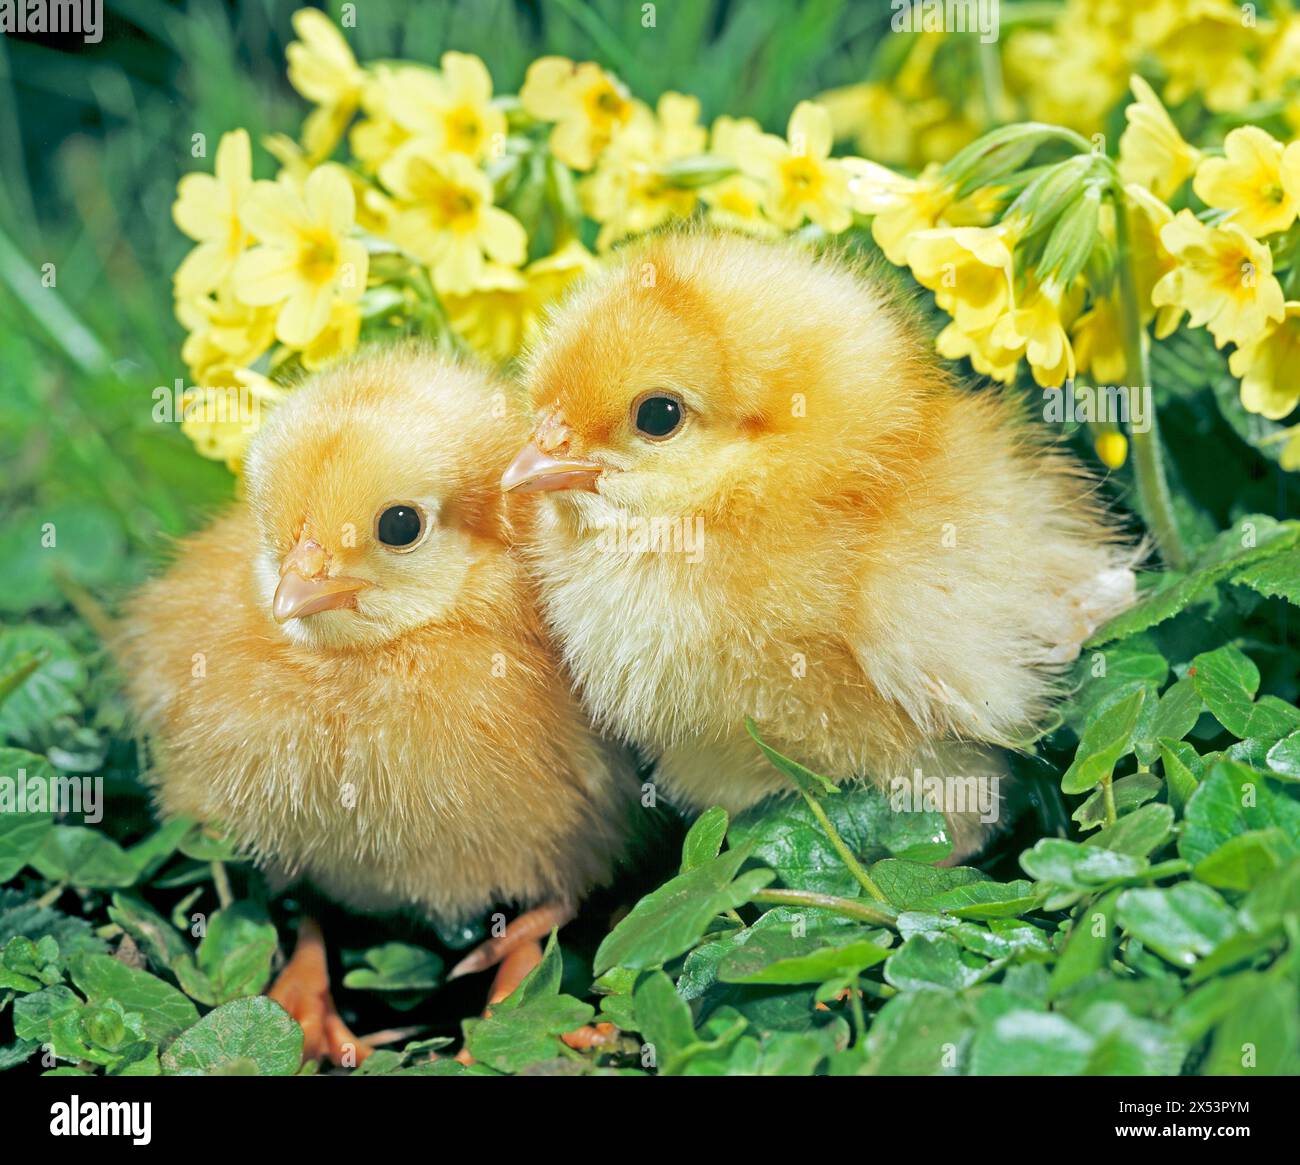 Two chickens in spring meadow with oxlips. Germany Stock Photo